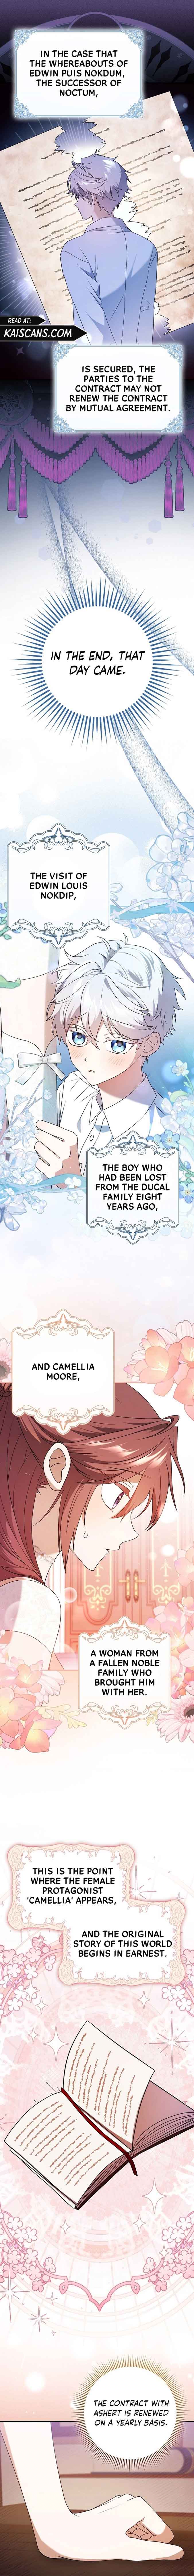 The Lost Cinderella chapter 2